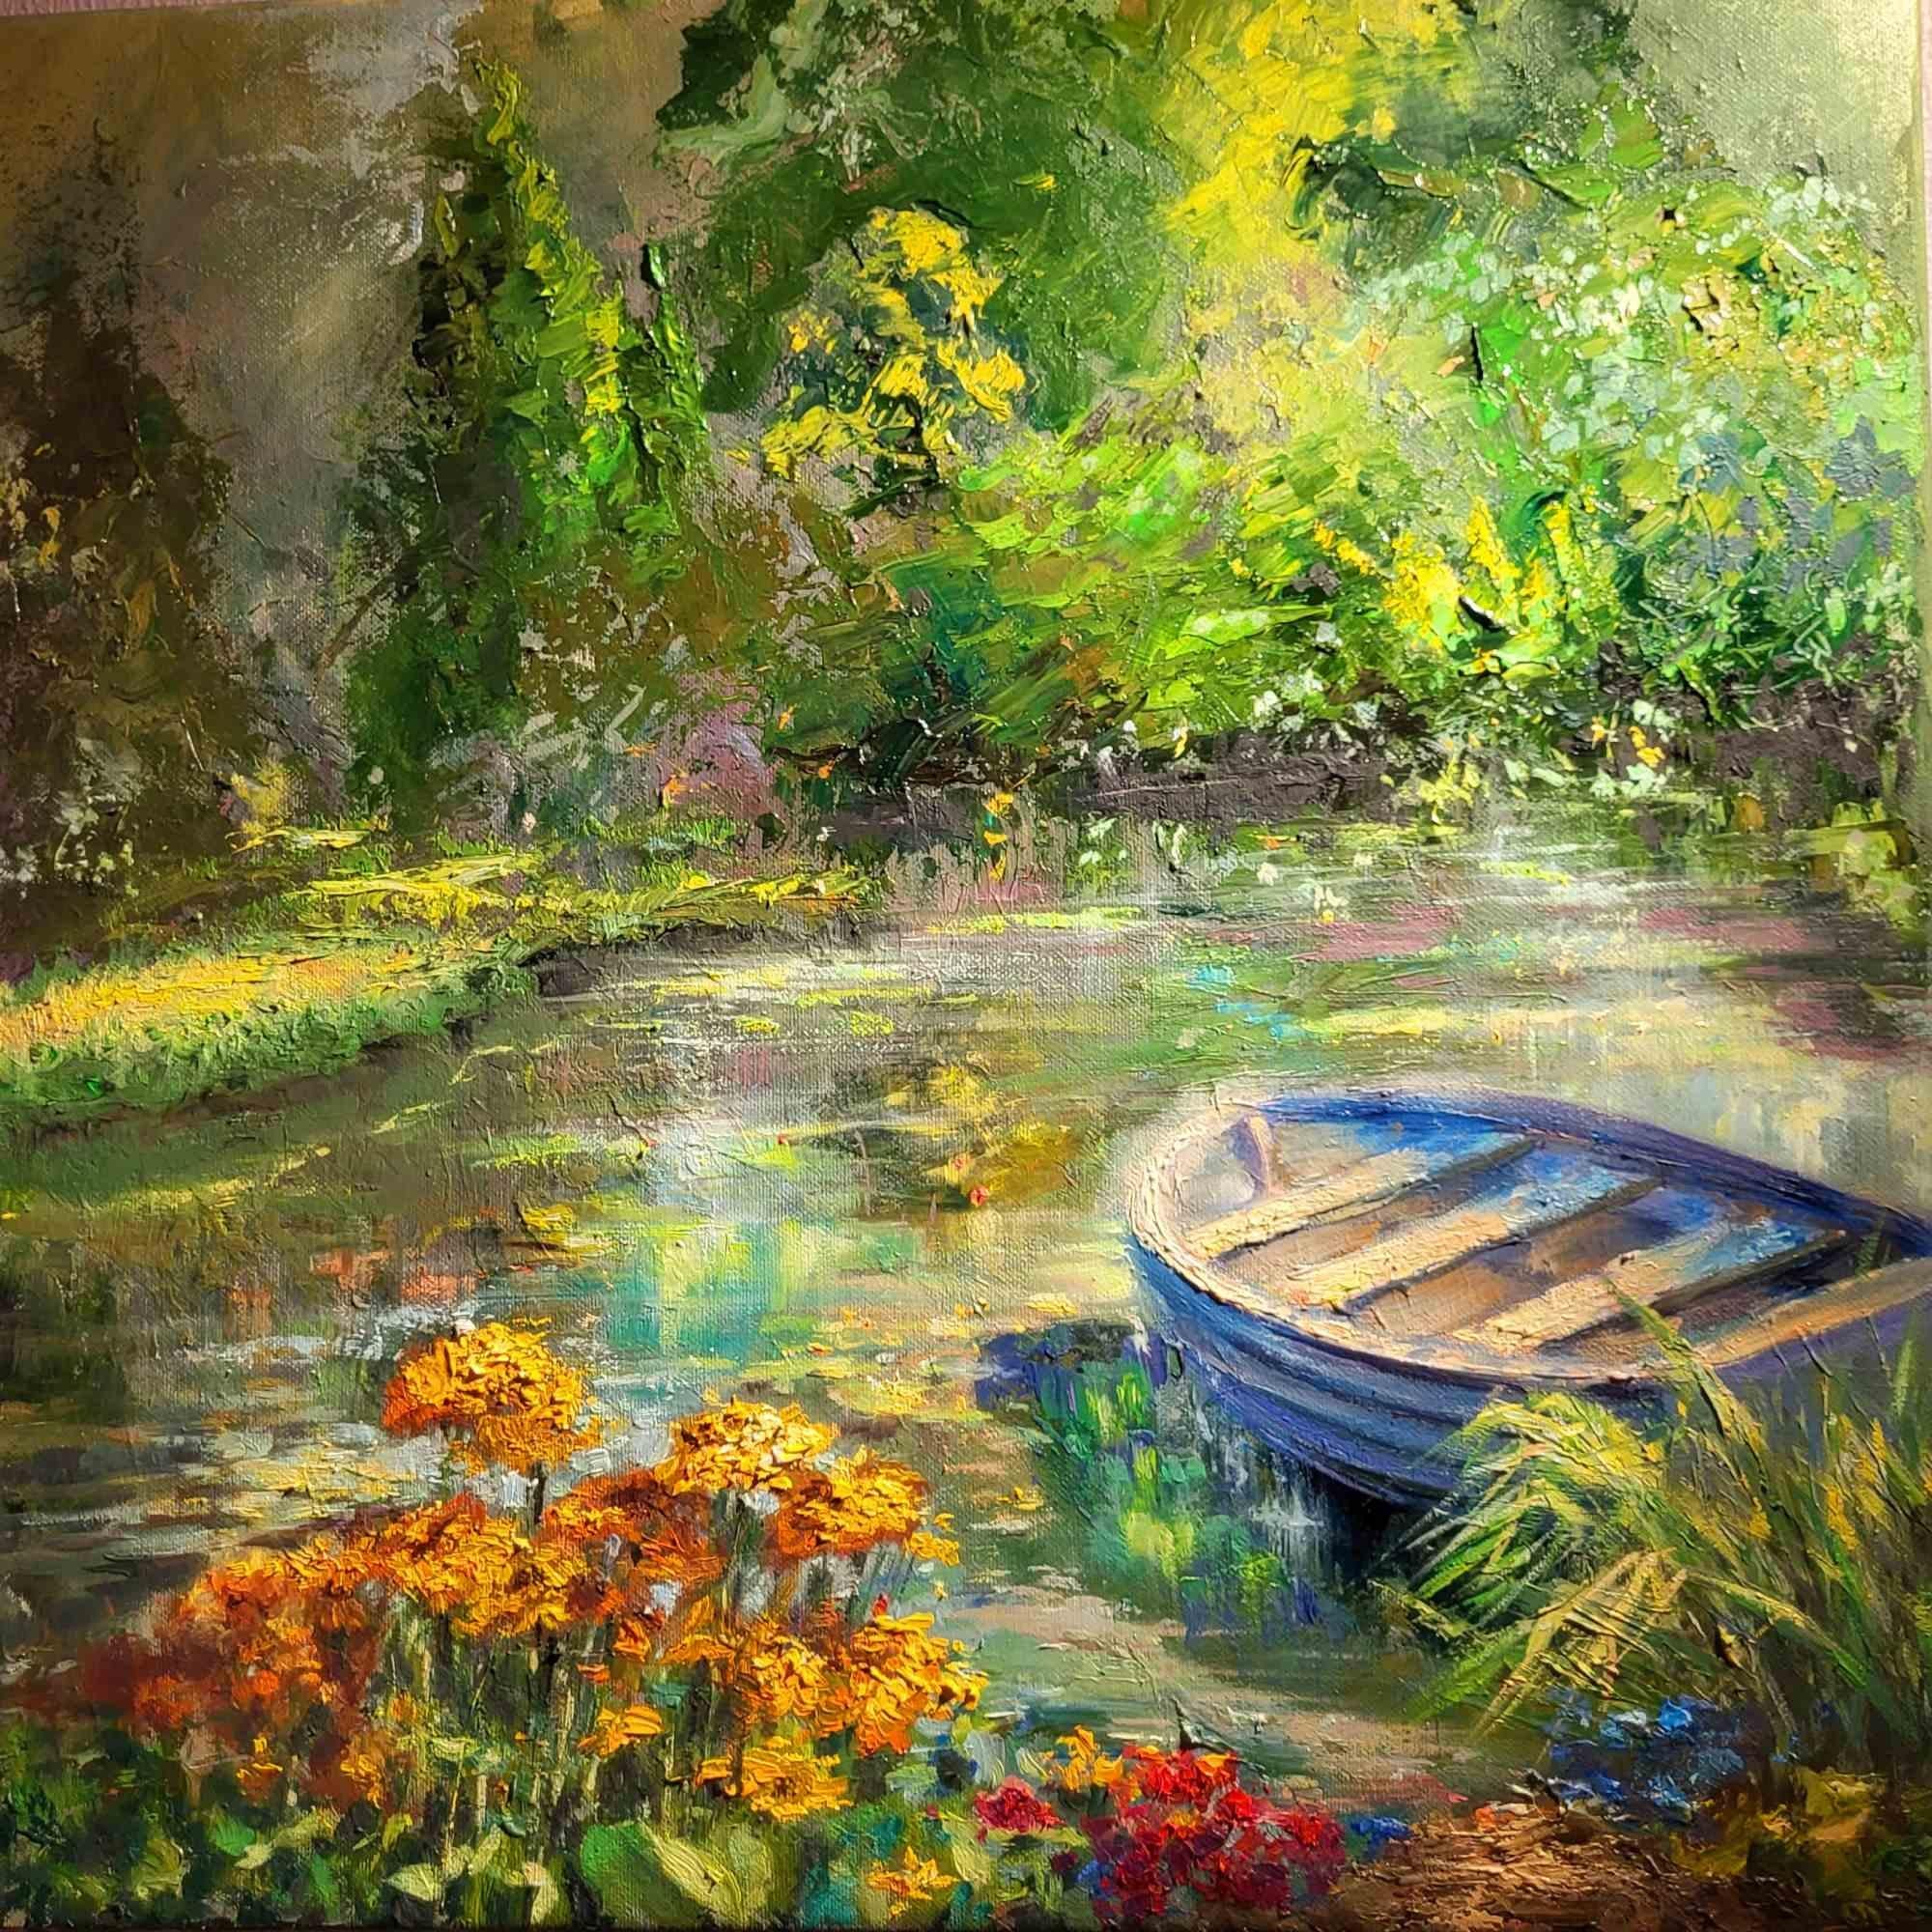 Oil painting 'Midday in park',
On canvas 50 x 50 cm,
2023
Excellent condition.